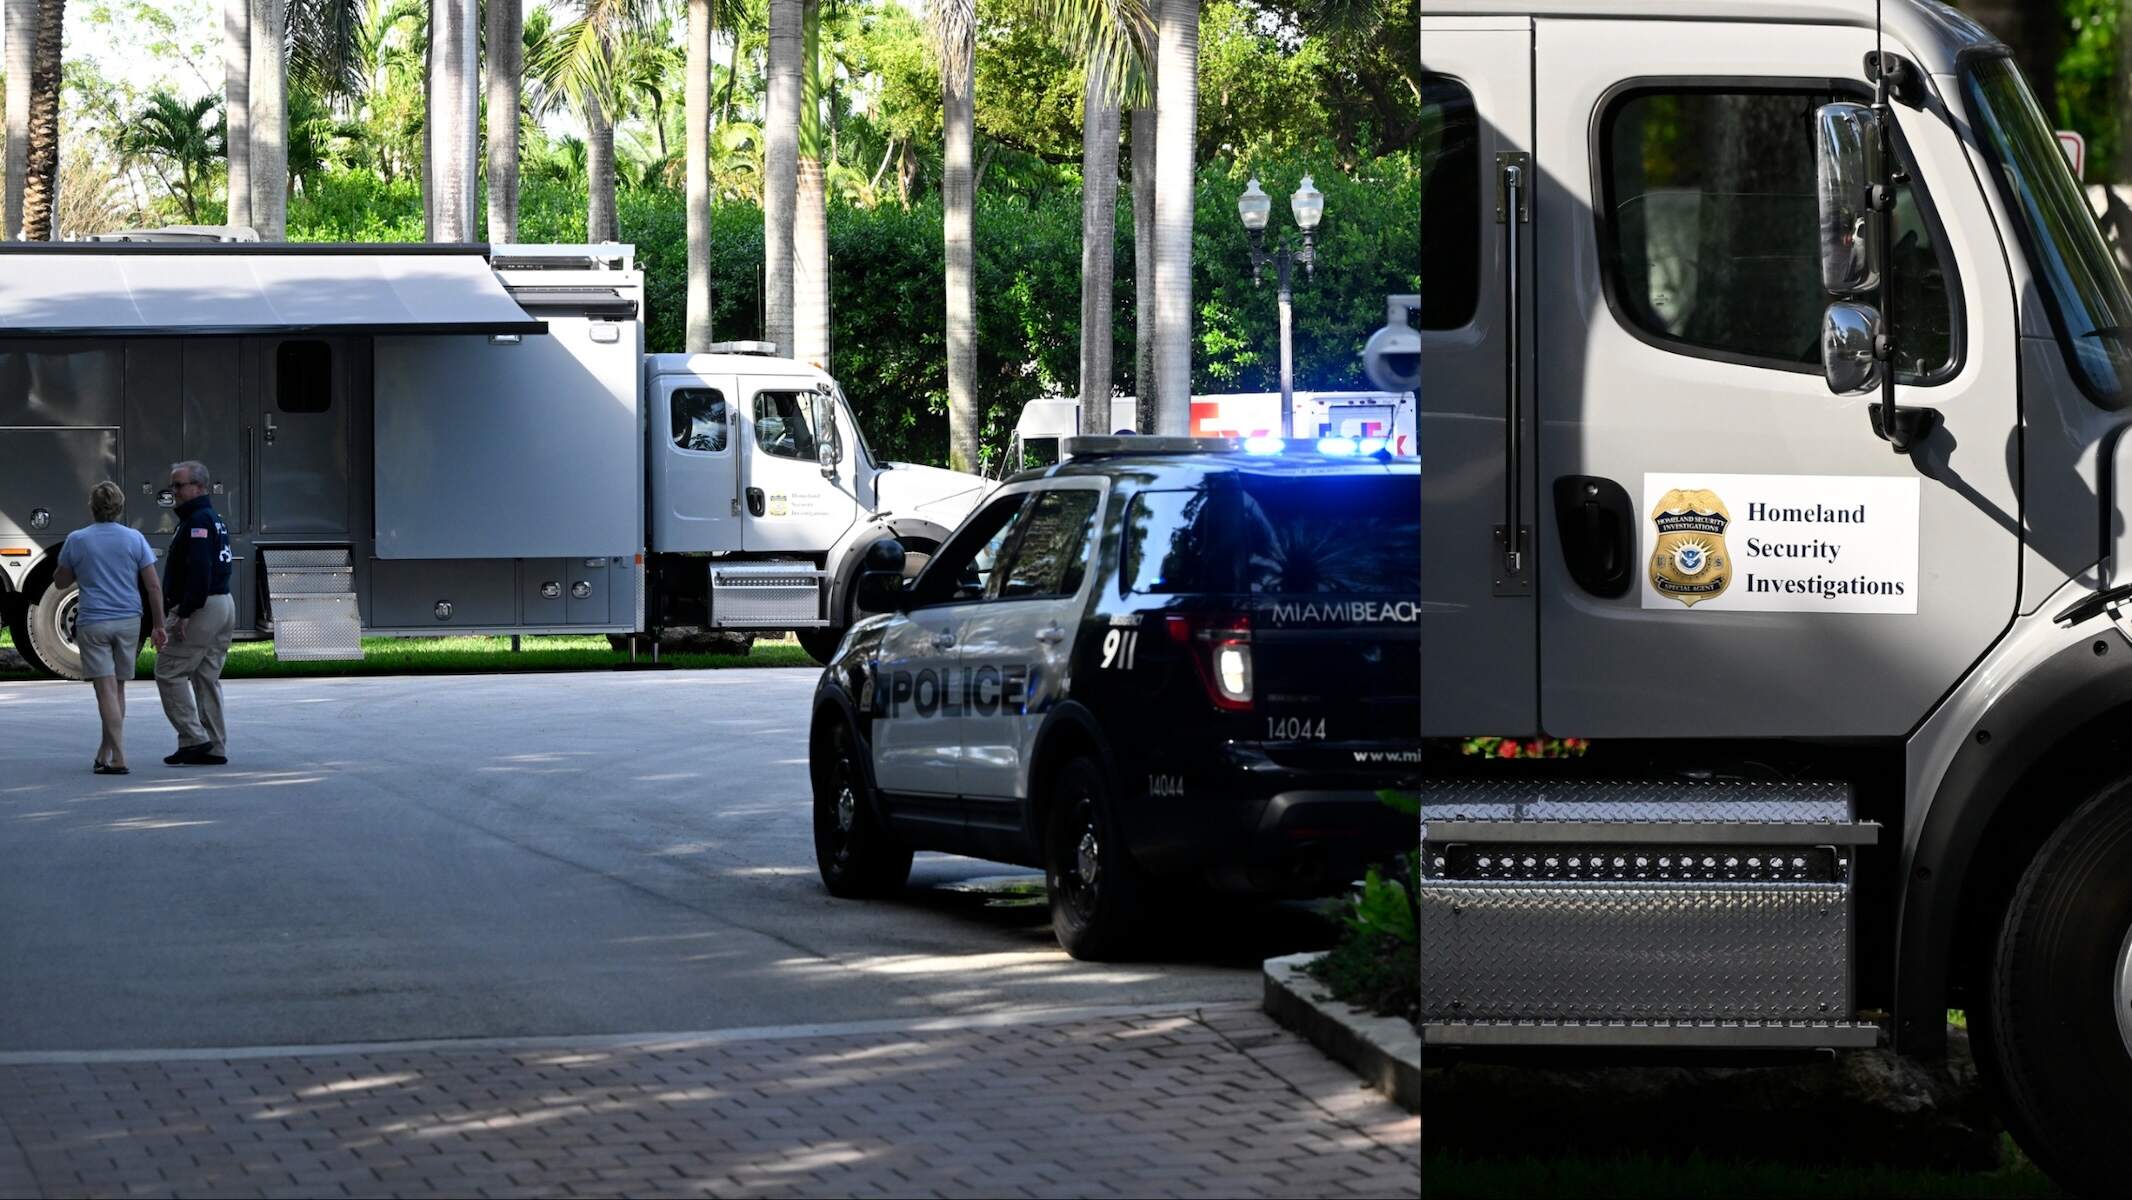 Homeland Security officers are seen at the waterfront mansion of Sean Combs aka Diddy in Miami